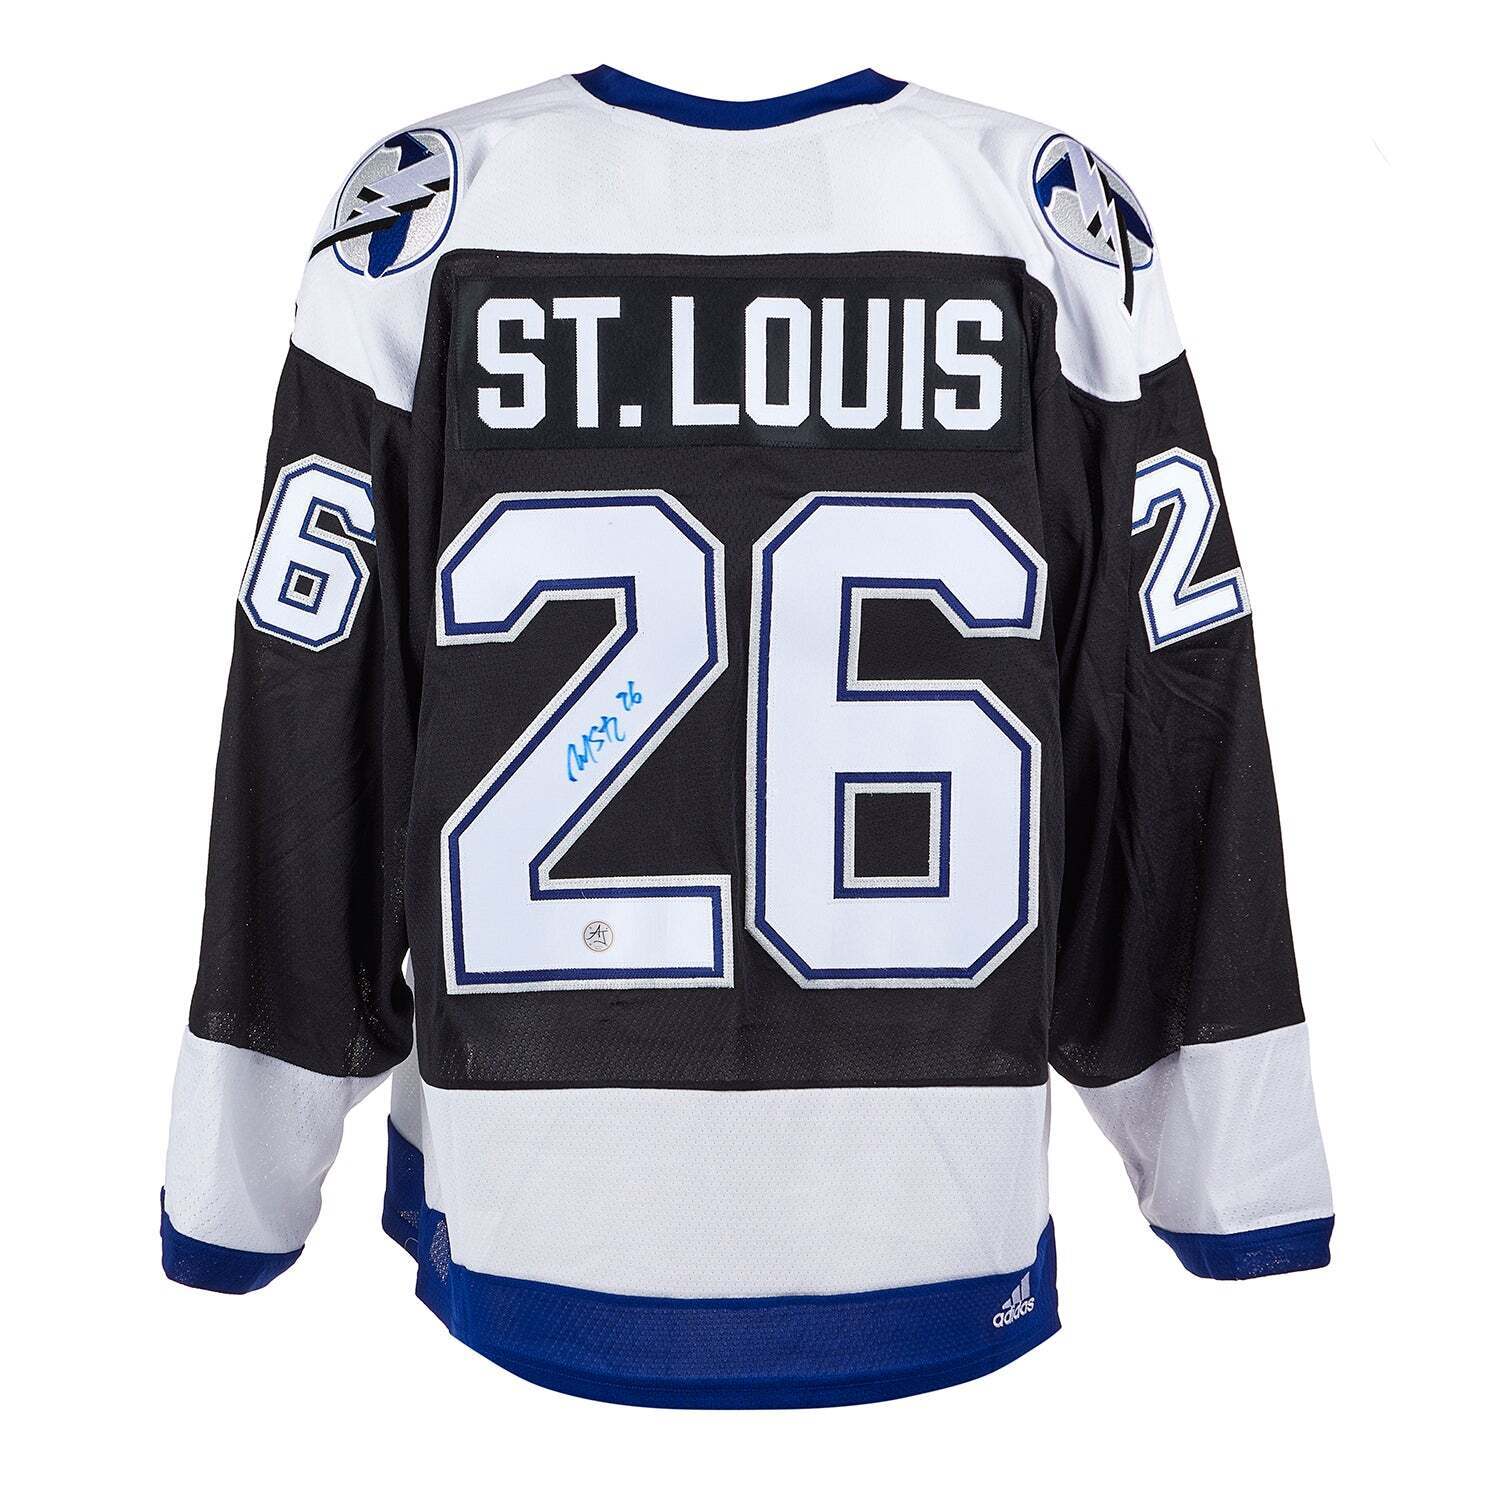 Martin St. Louis autographed Jersey (Tampa Bay Lightning)